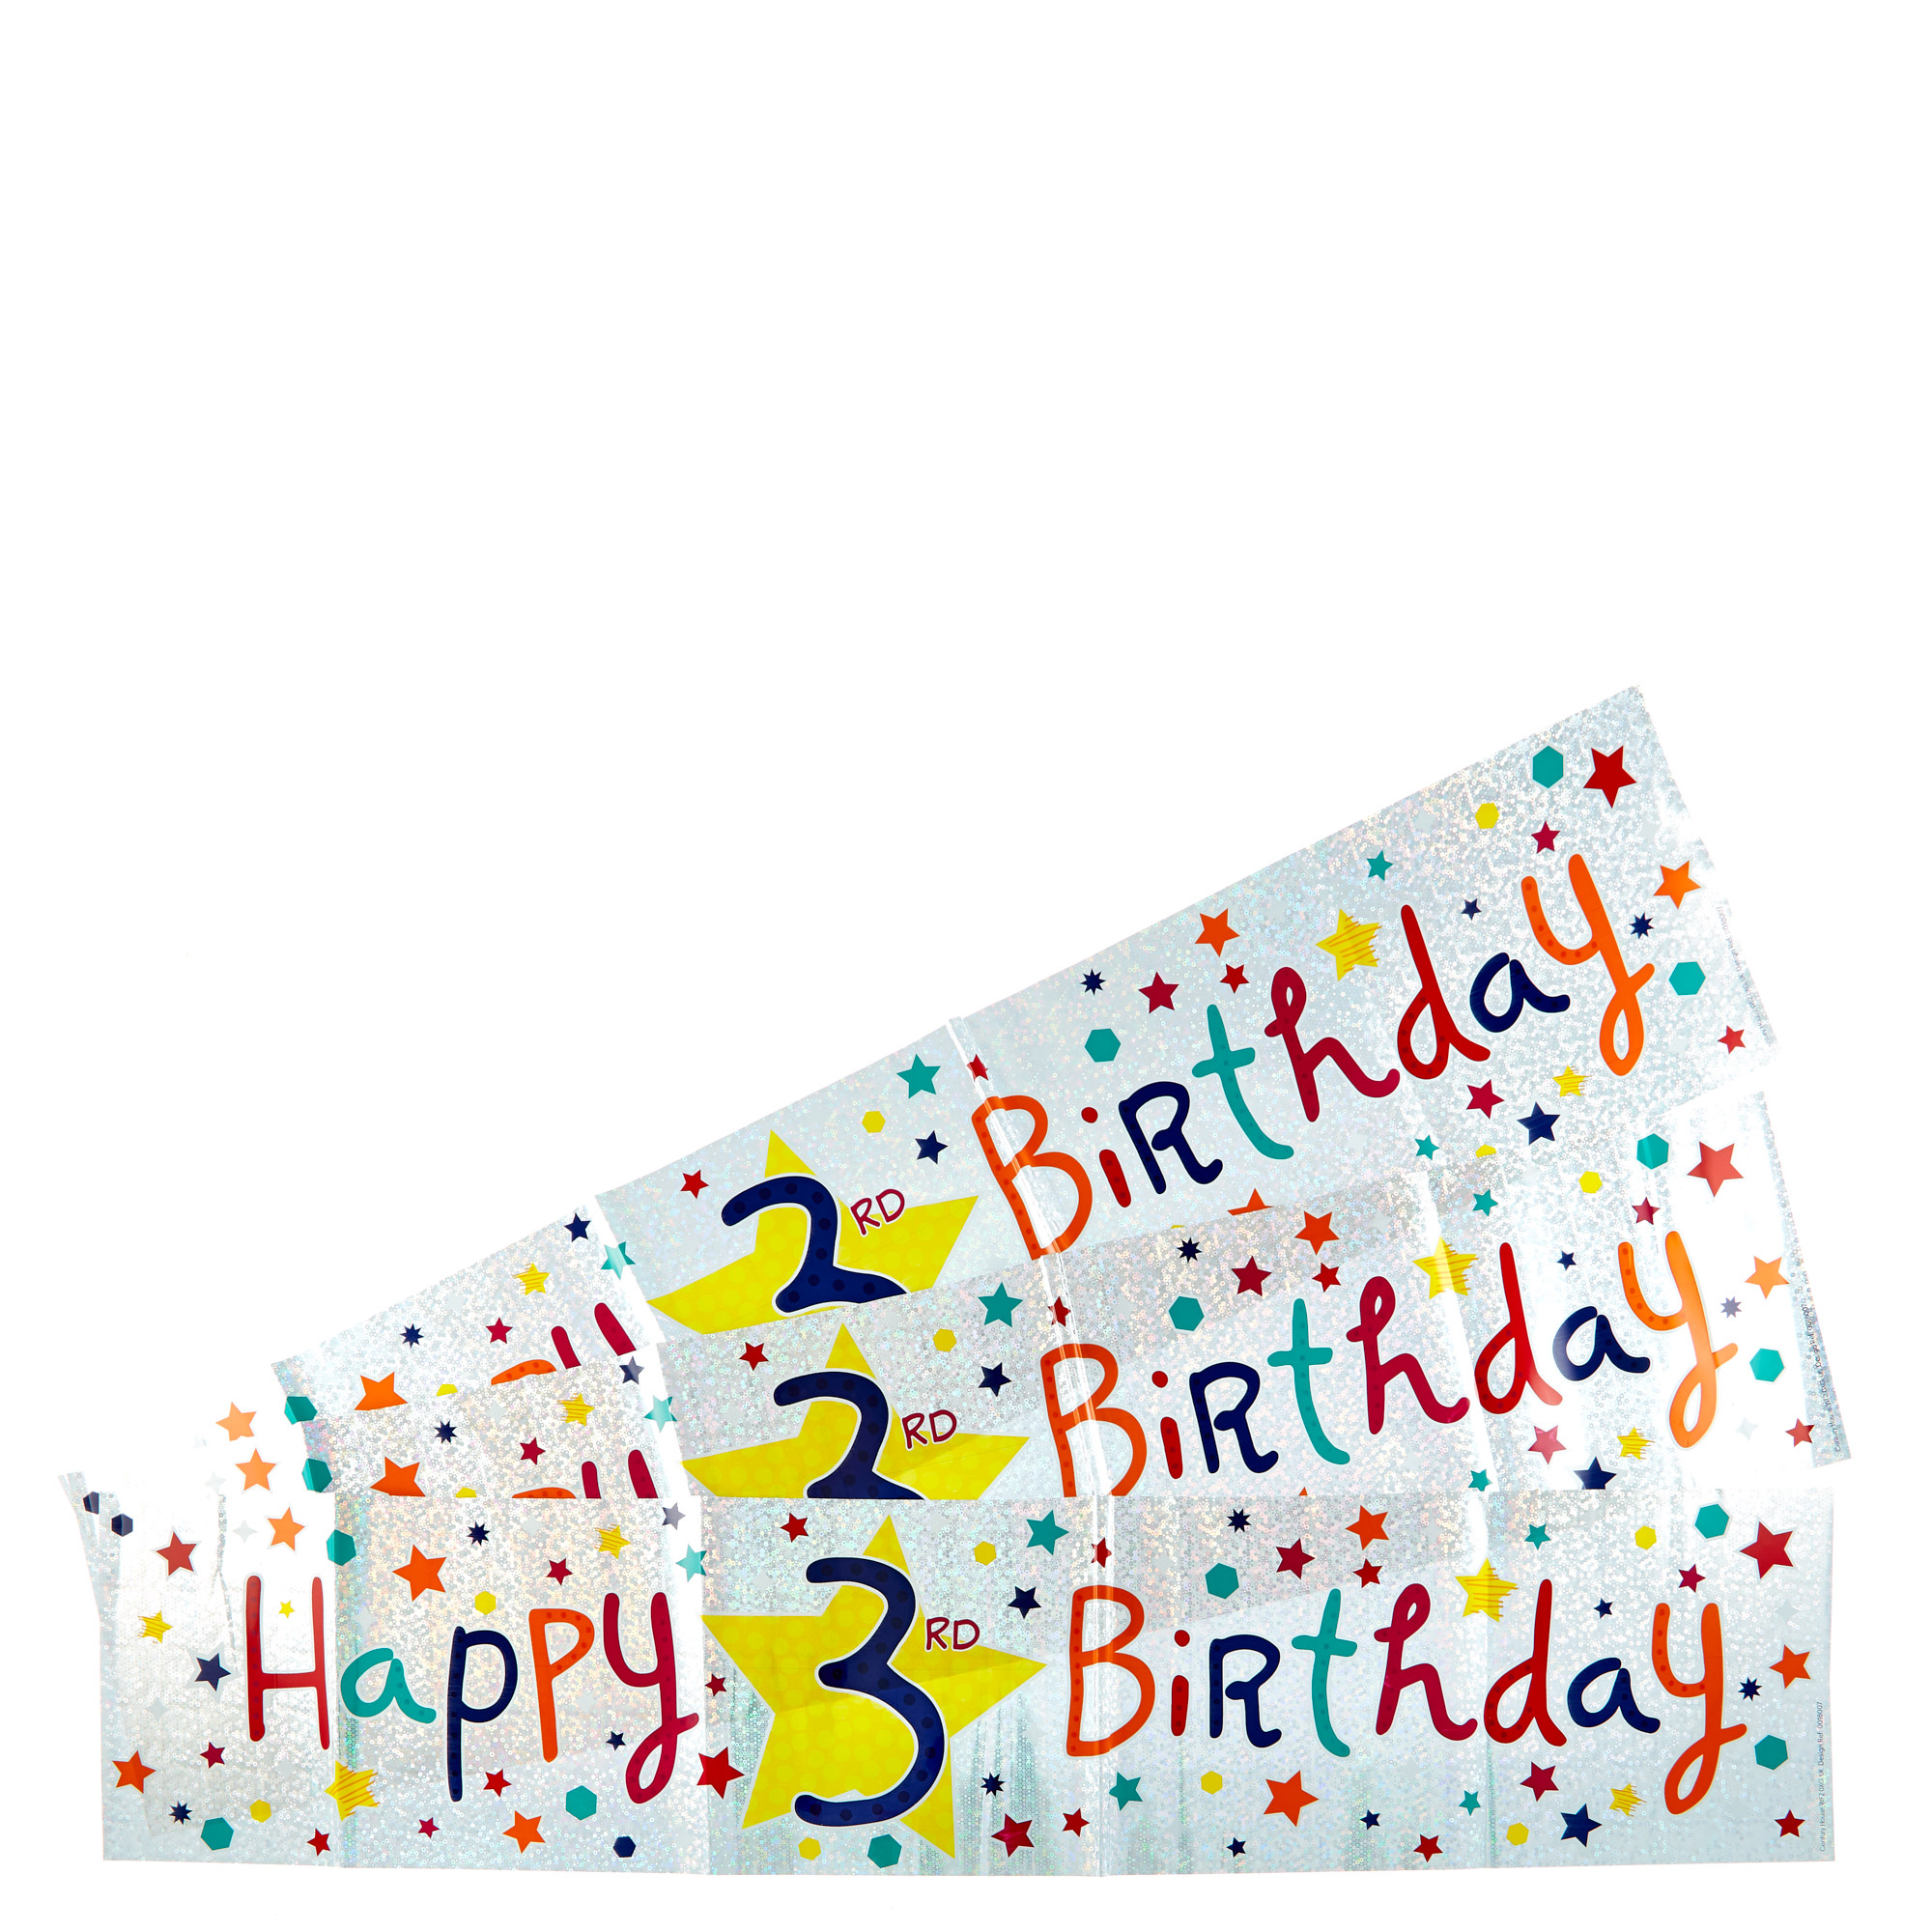 Holographic 3rd Birthday Party Banners - Pack Of 3 